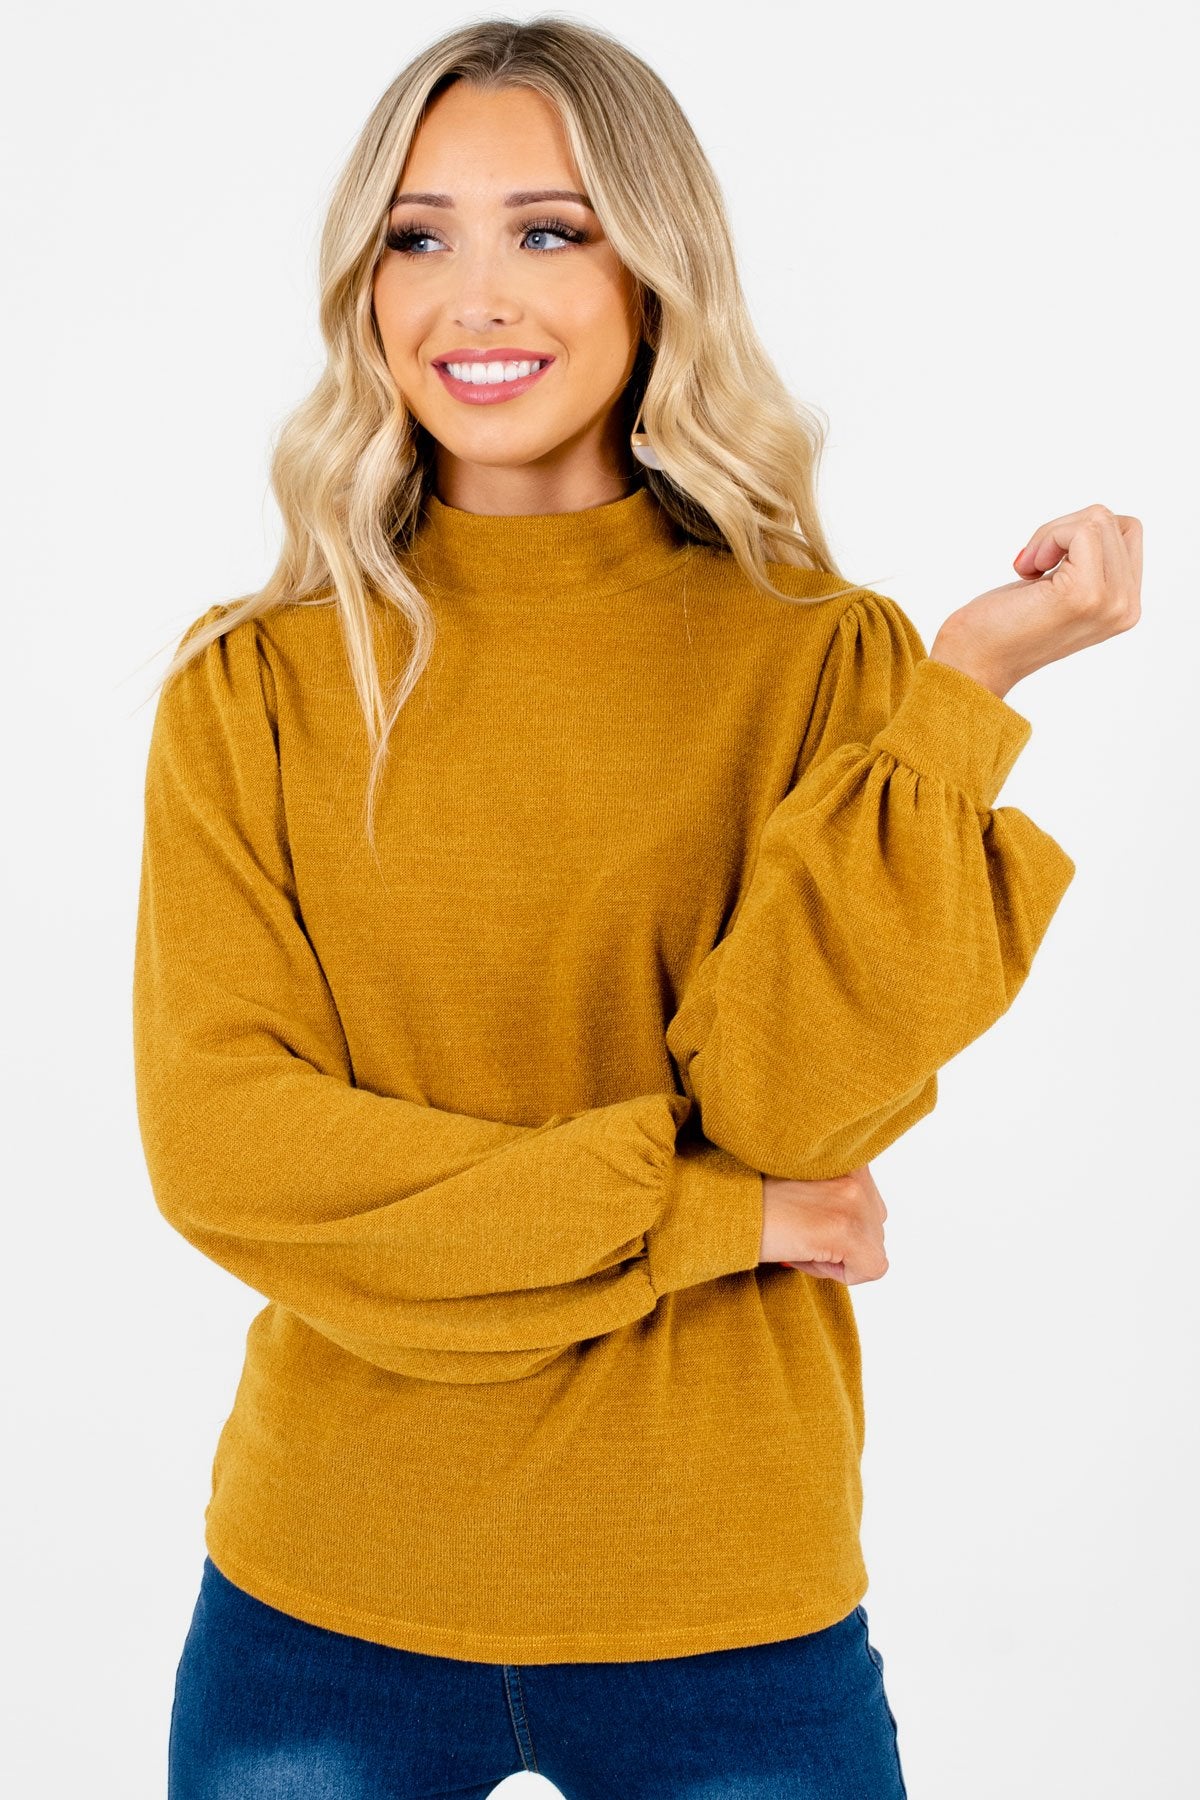 Women’s Mustard Yellow Cozy and Warm Boutique Clothing